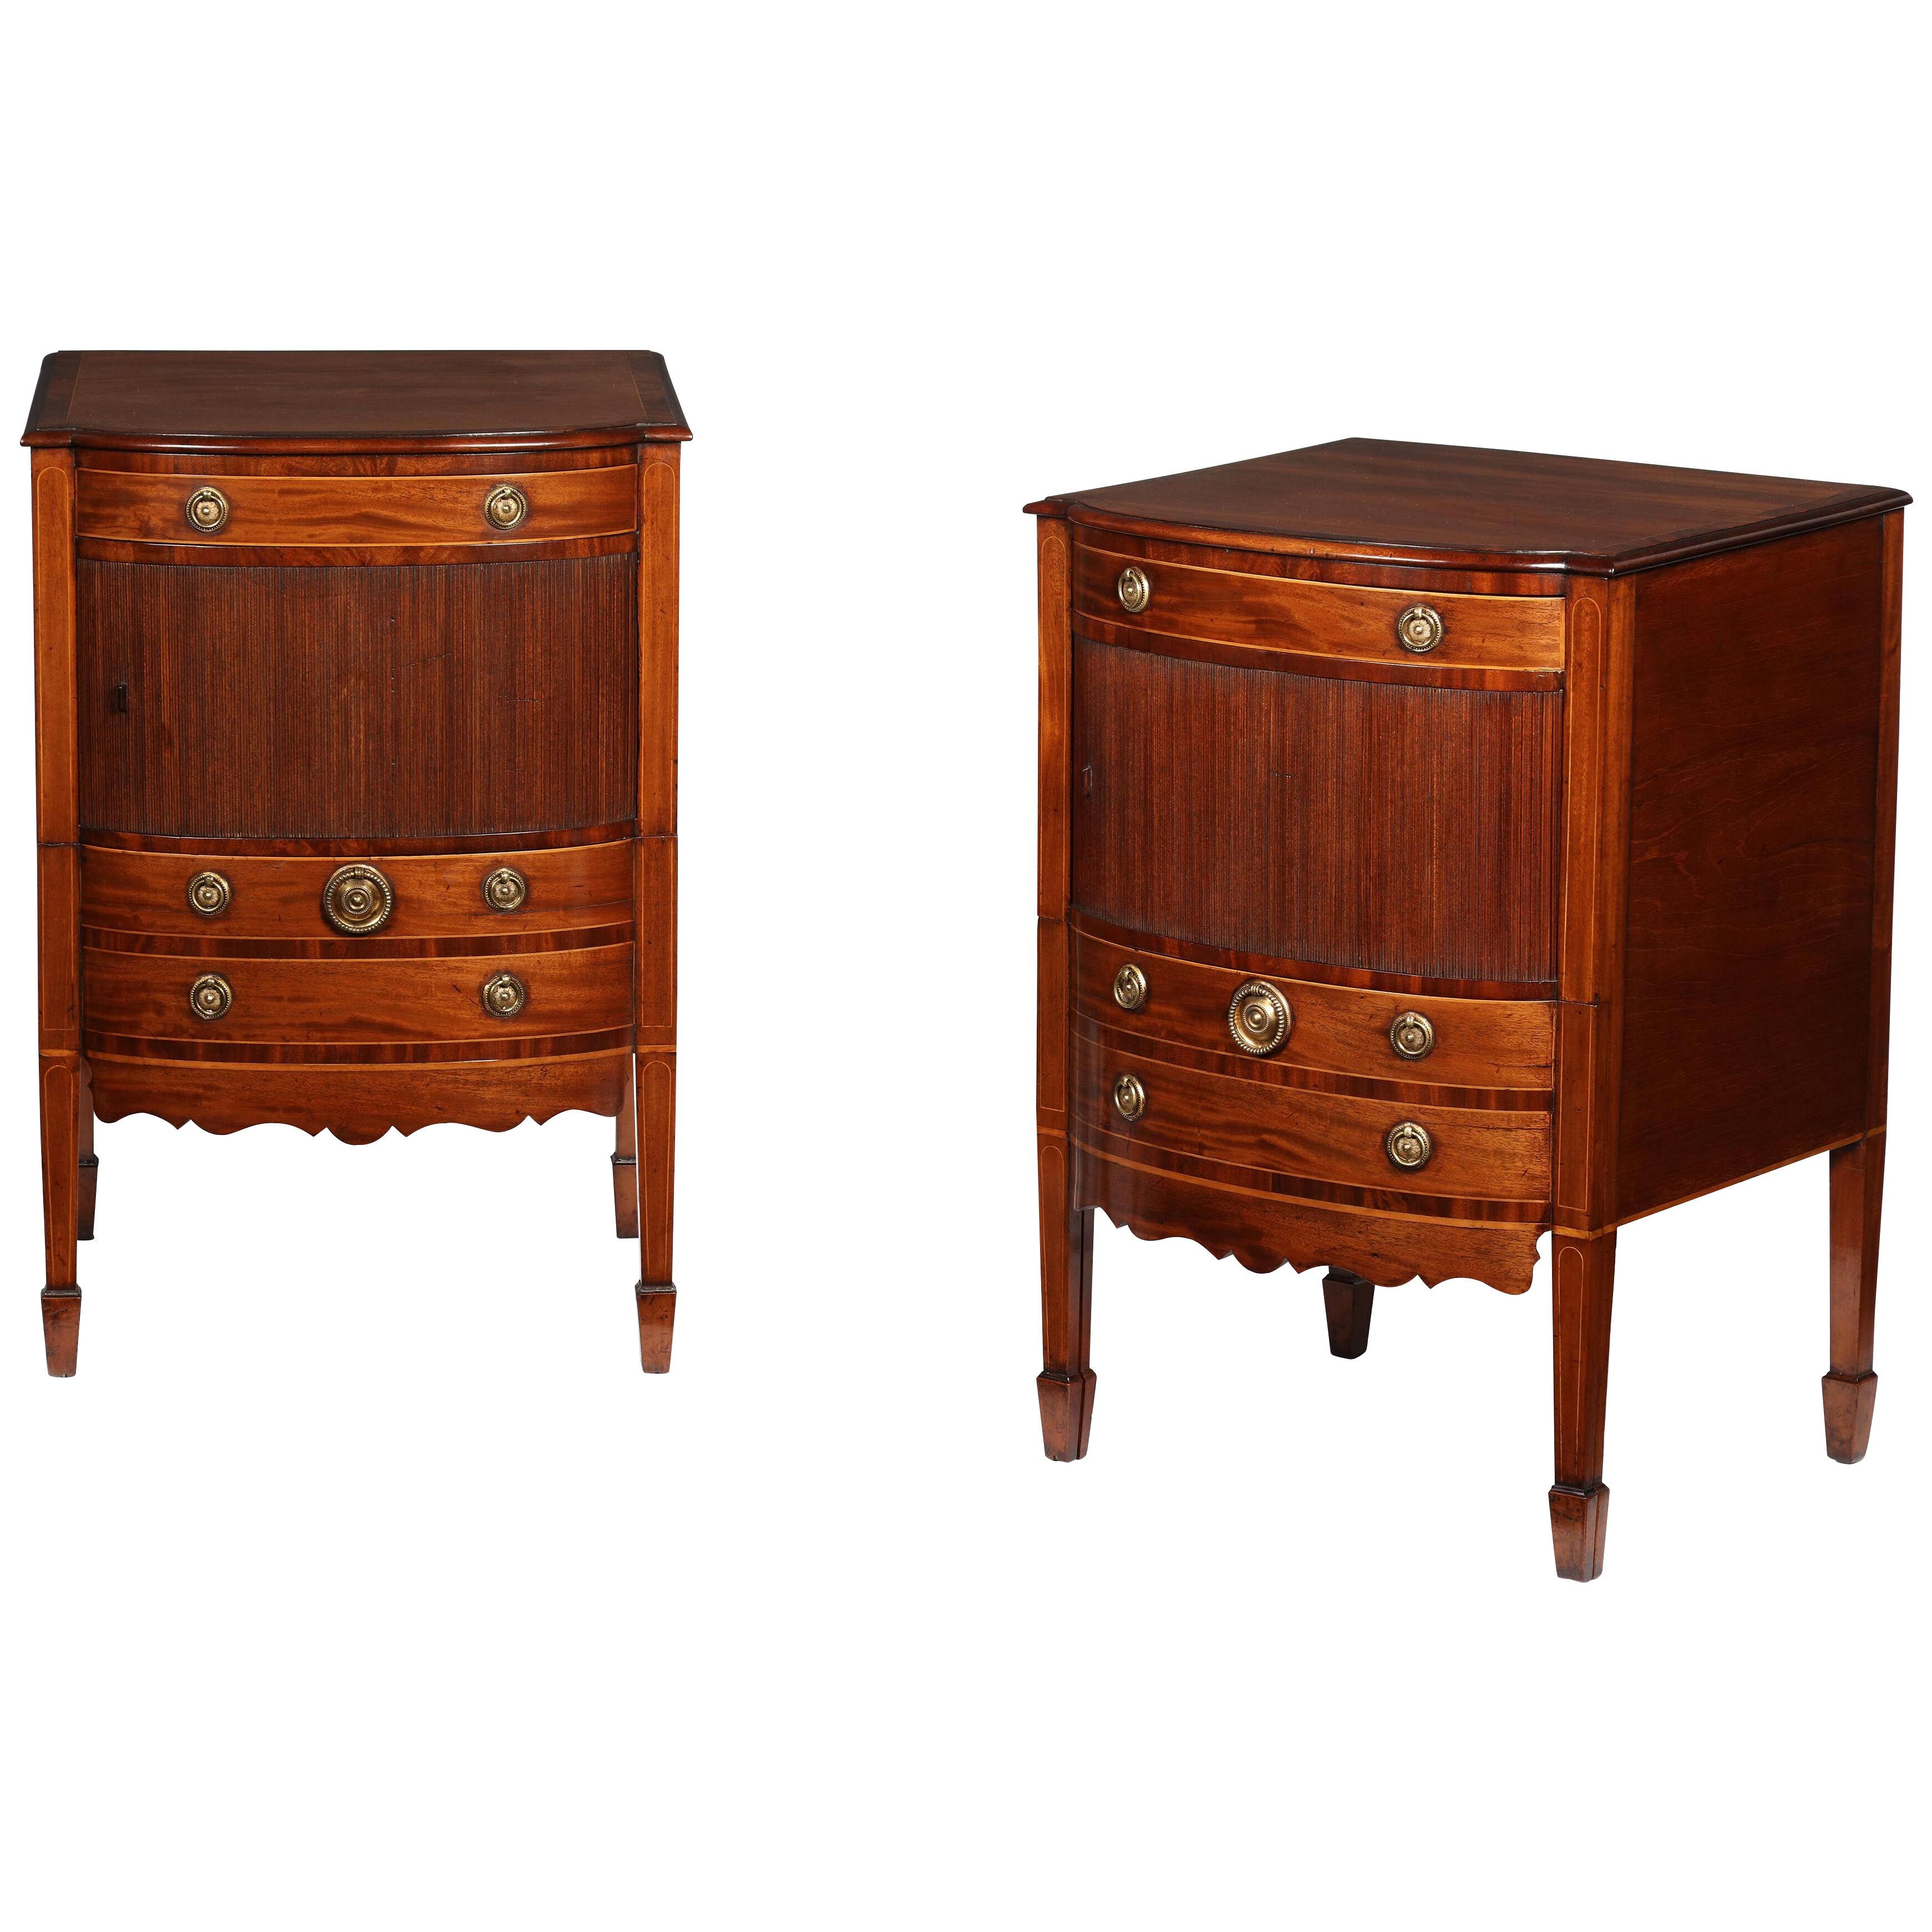 A pair of George III mahogany commode side tables